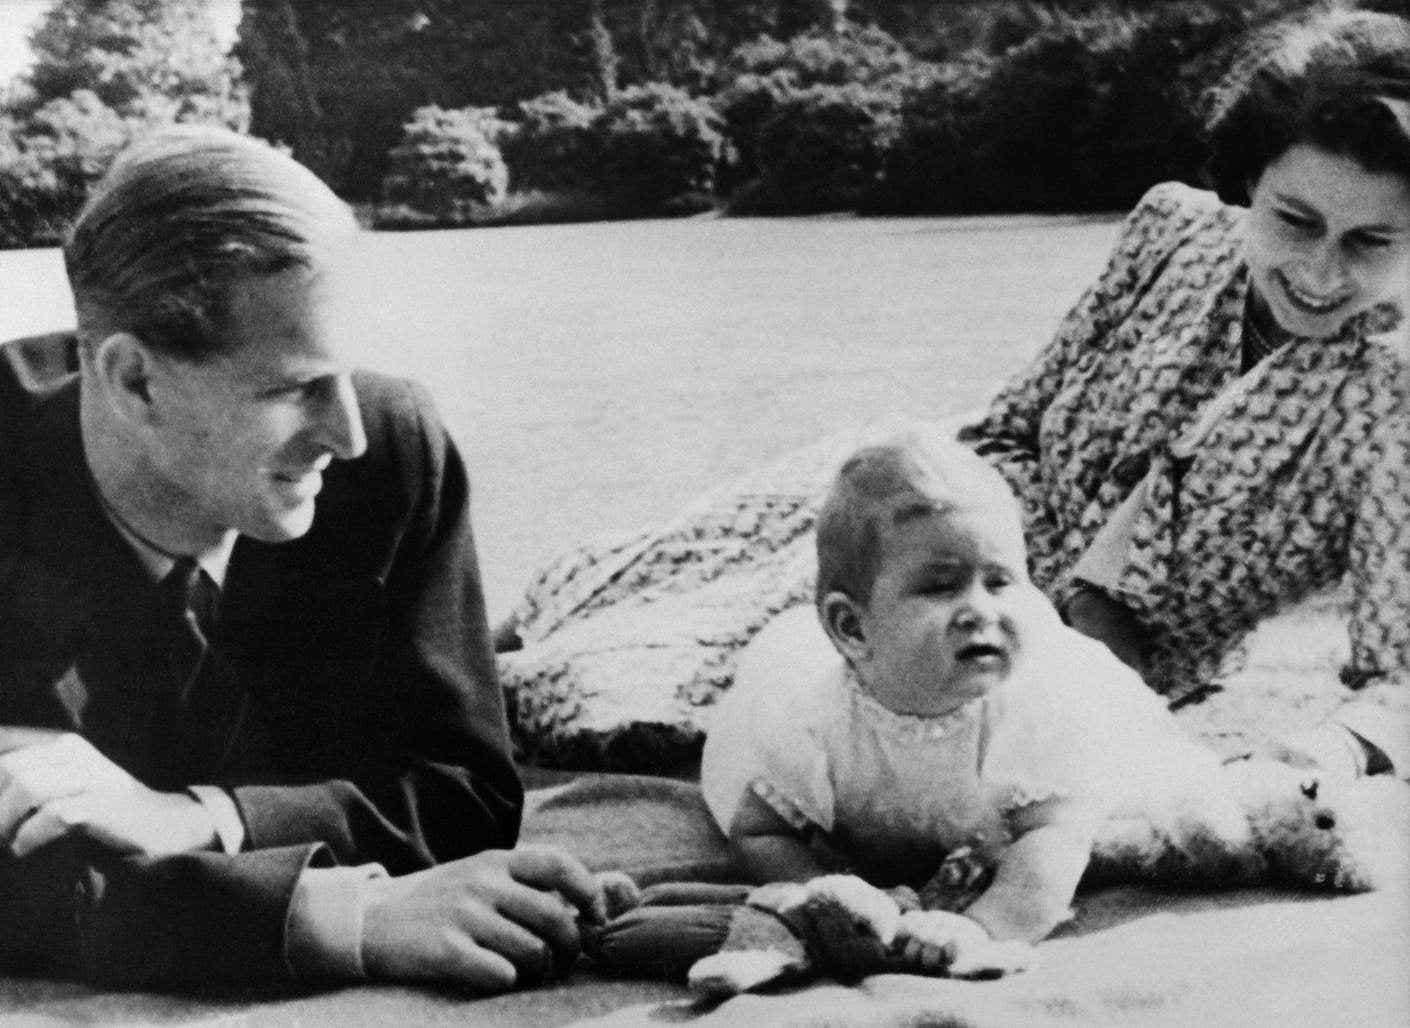 Princess Elizabeth of England and Prince Philip with their baby Prince Charles in 1949 lie togethr smiling on grass.